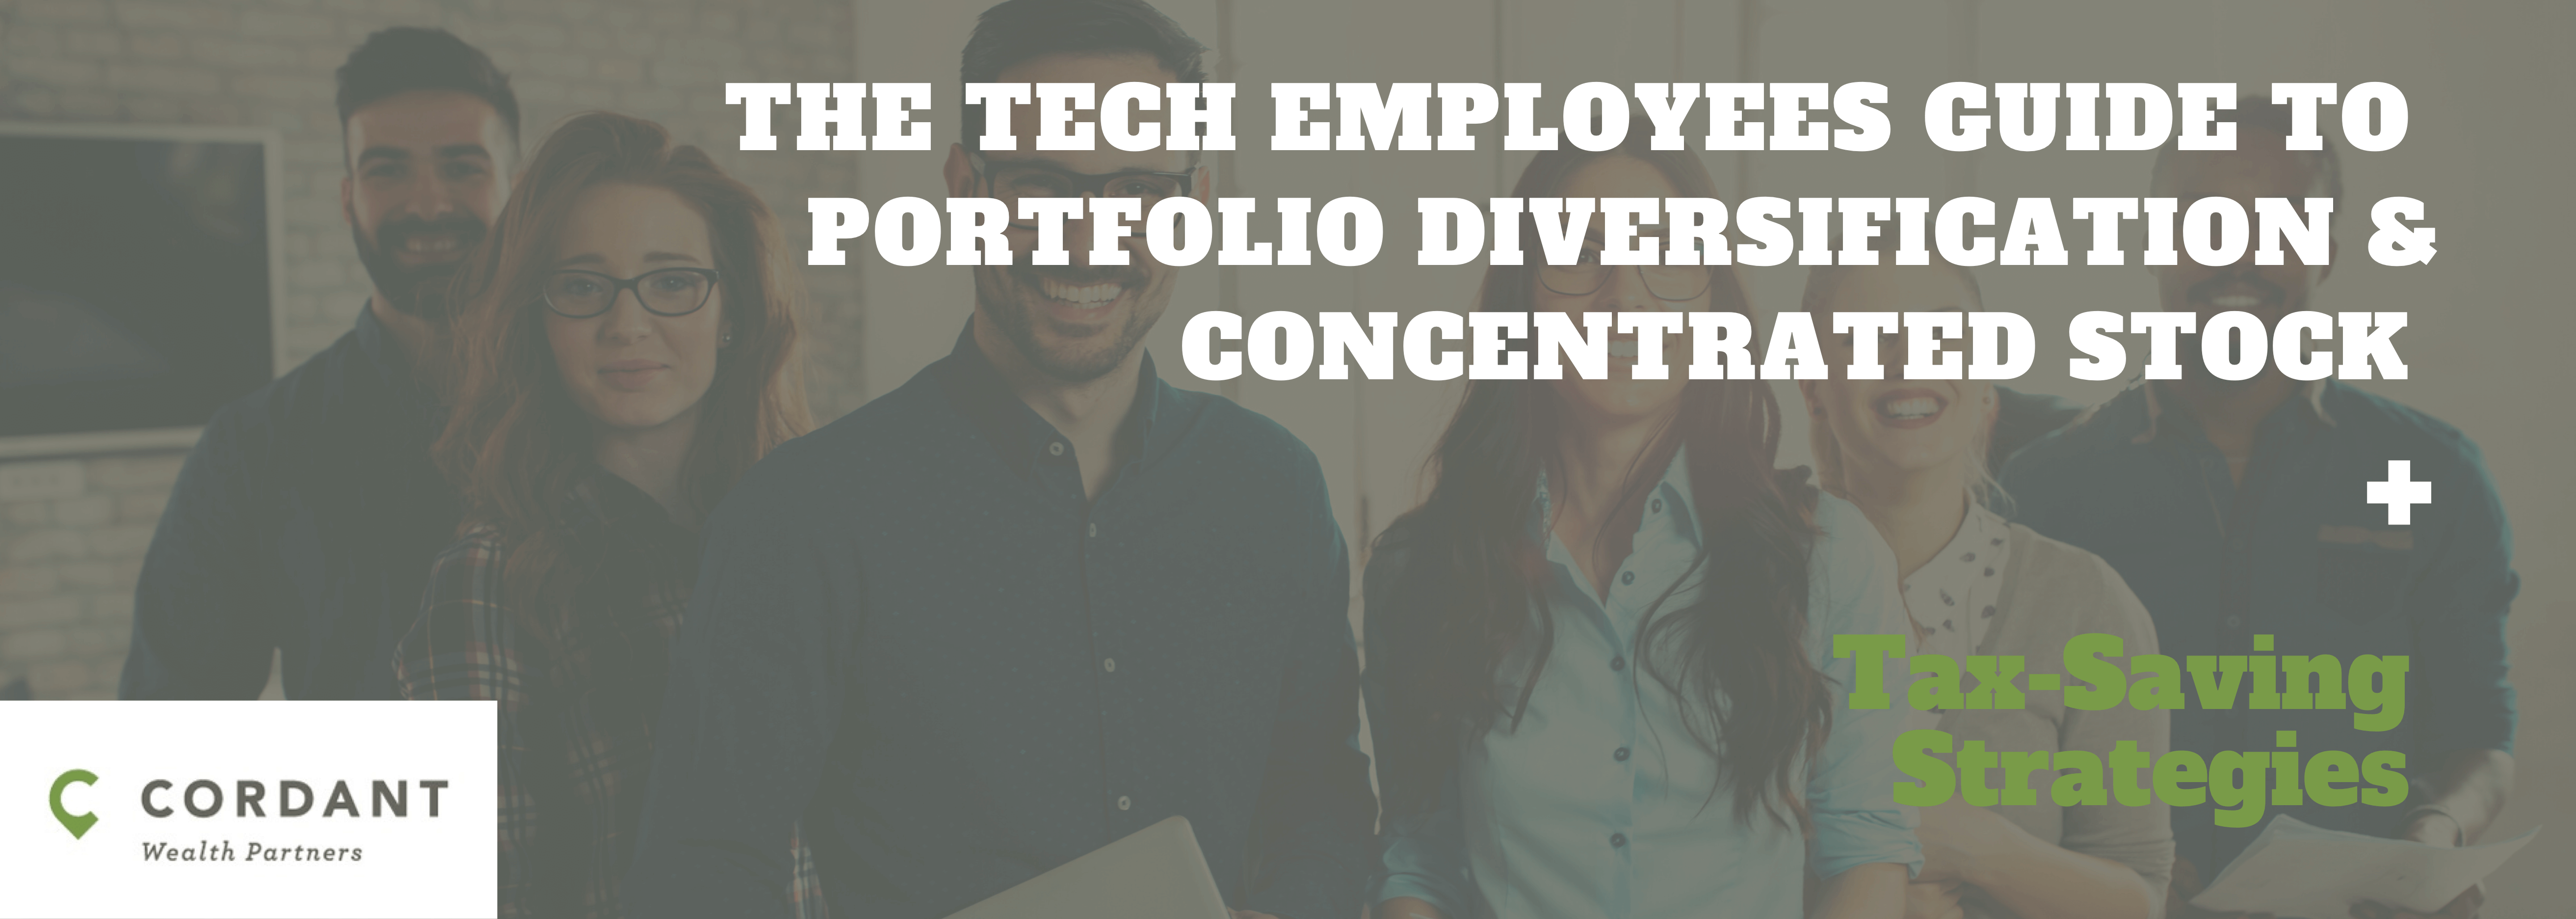 The Tech Employees Guide to Portfolio Diversification and Concentrated Stock + Tax Saving Strategies